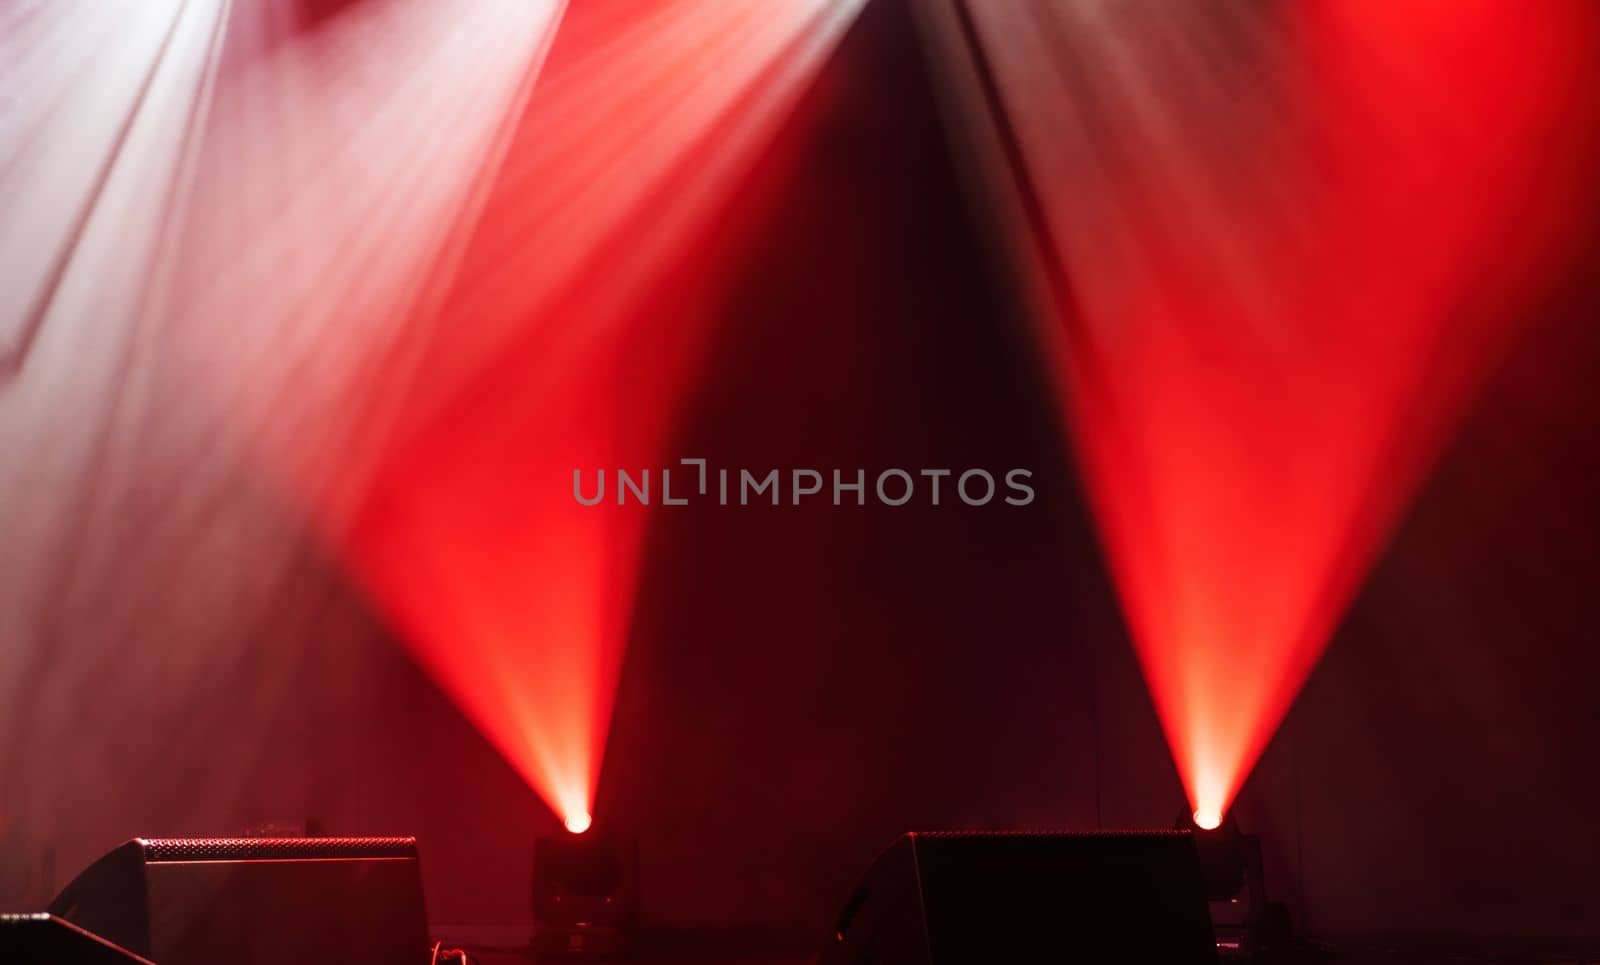 Light on a free stage, scene with red spotlights by GekaSkr